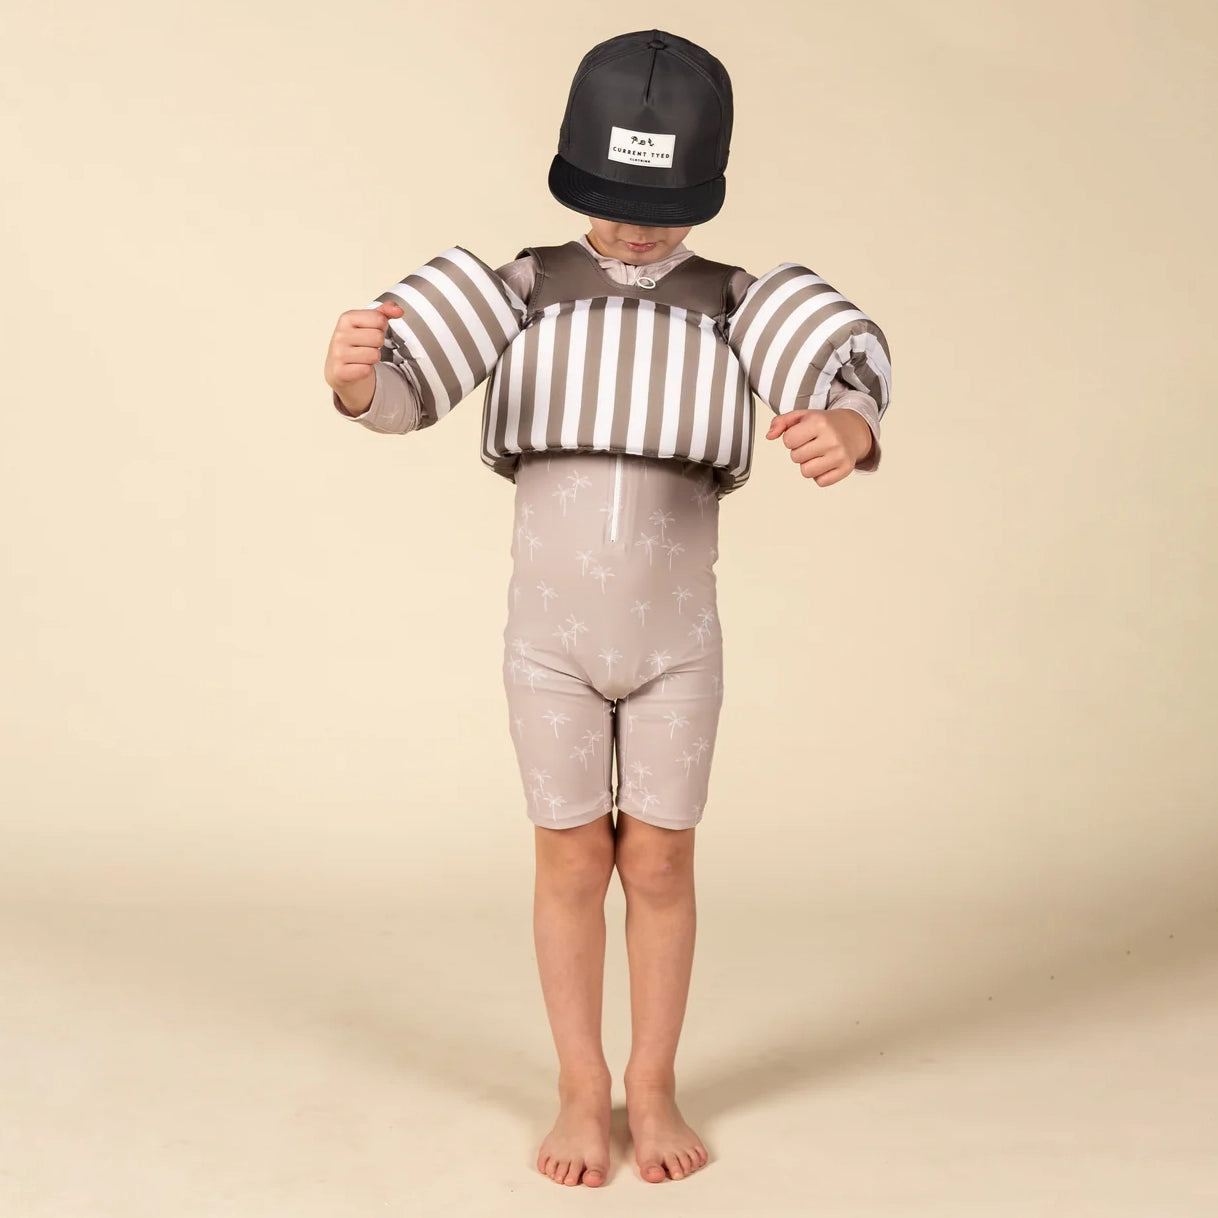 Boy wearing Current Tyed Clothing Swim Floaties - Brown Stripes